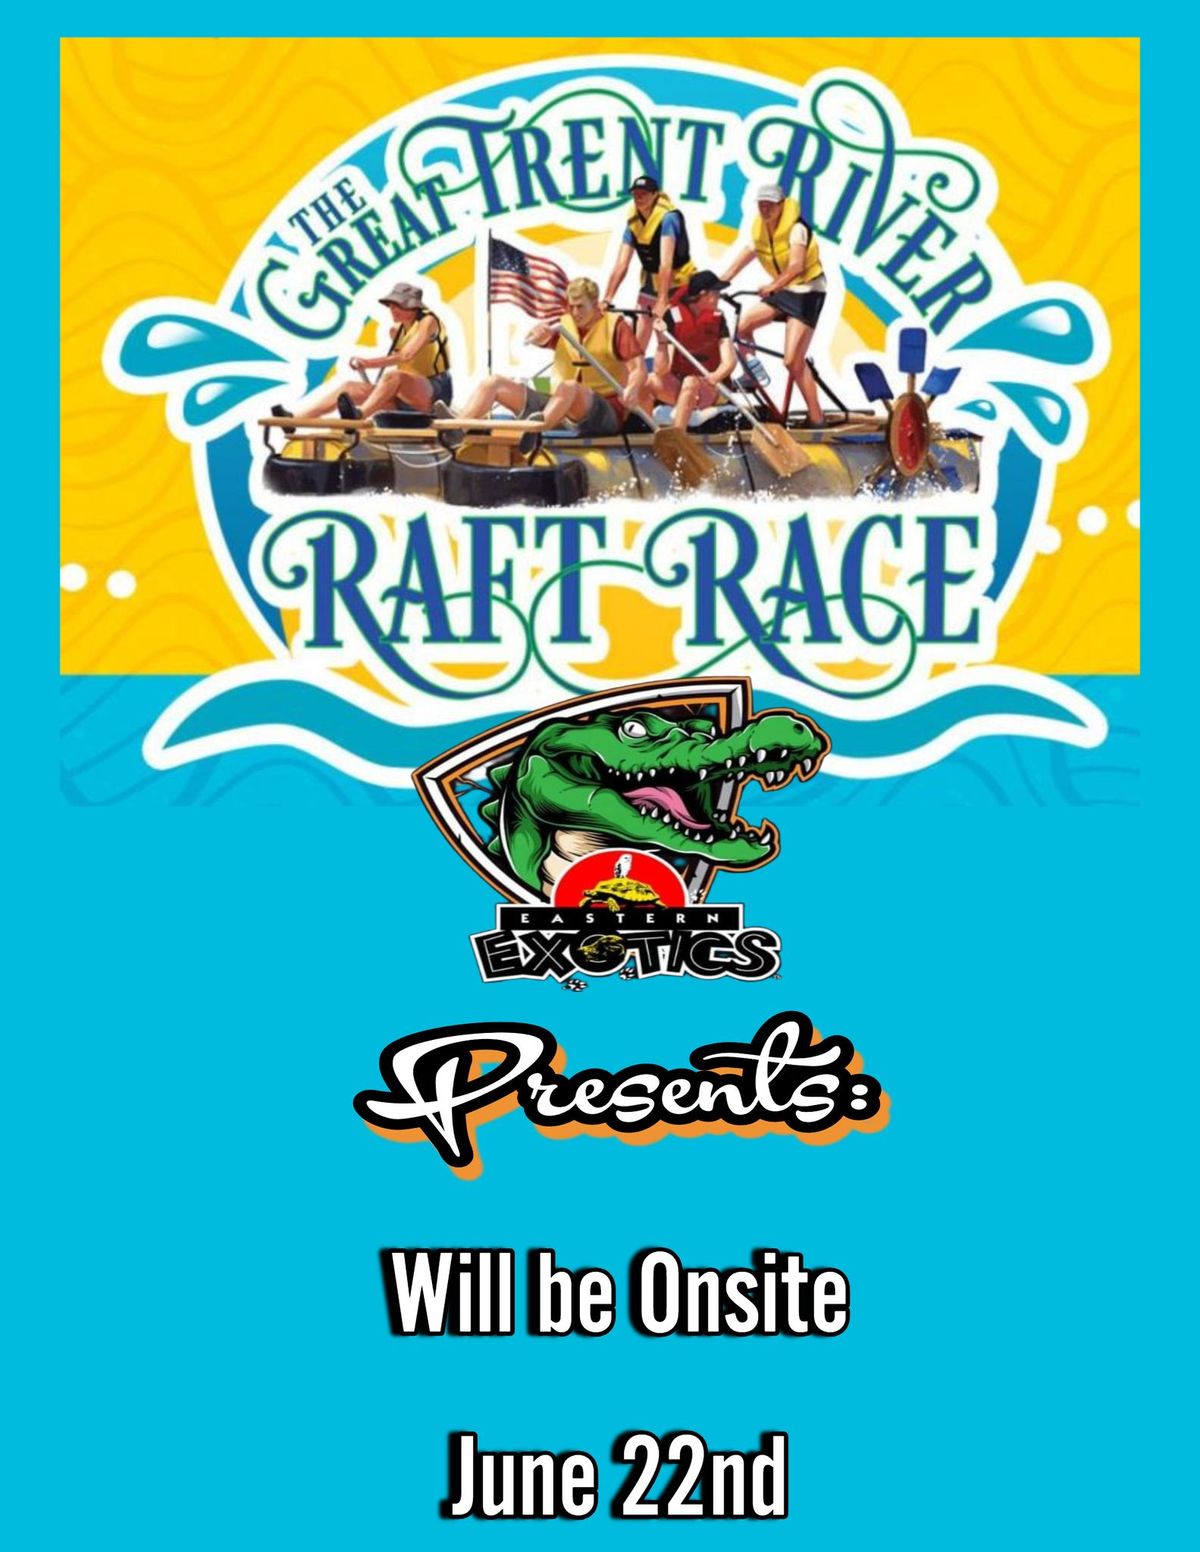 Eastern Exotics Presents: Will be at the Great Trent River Raft Race.